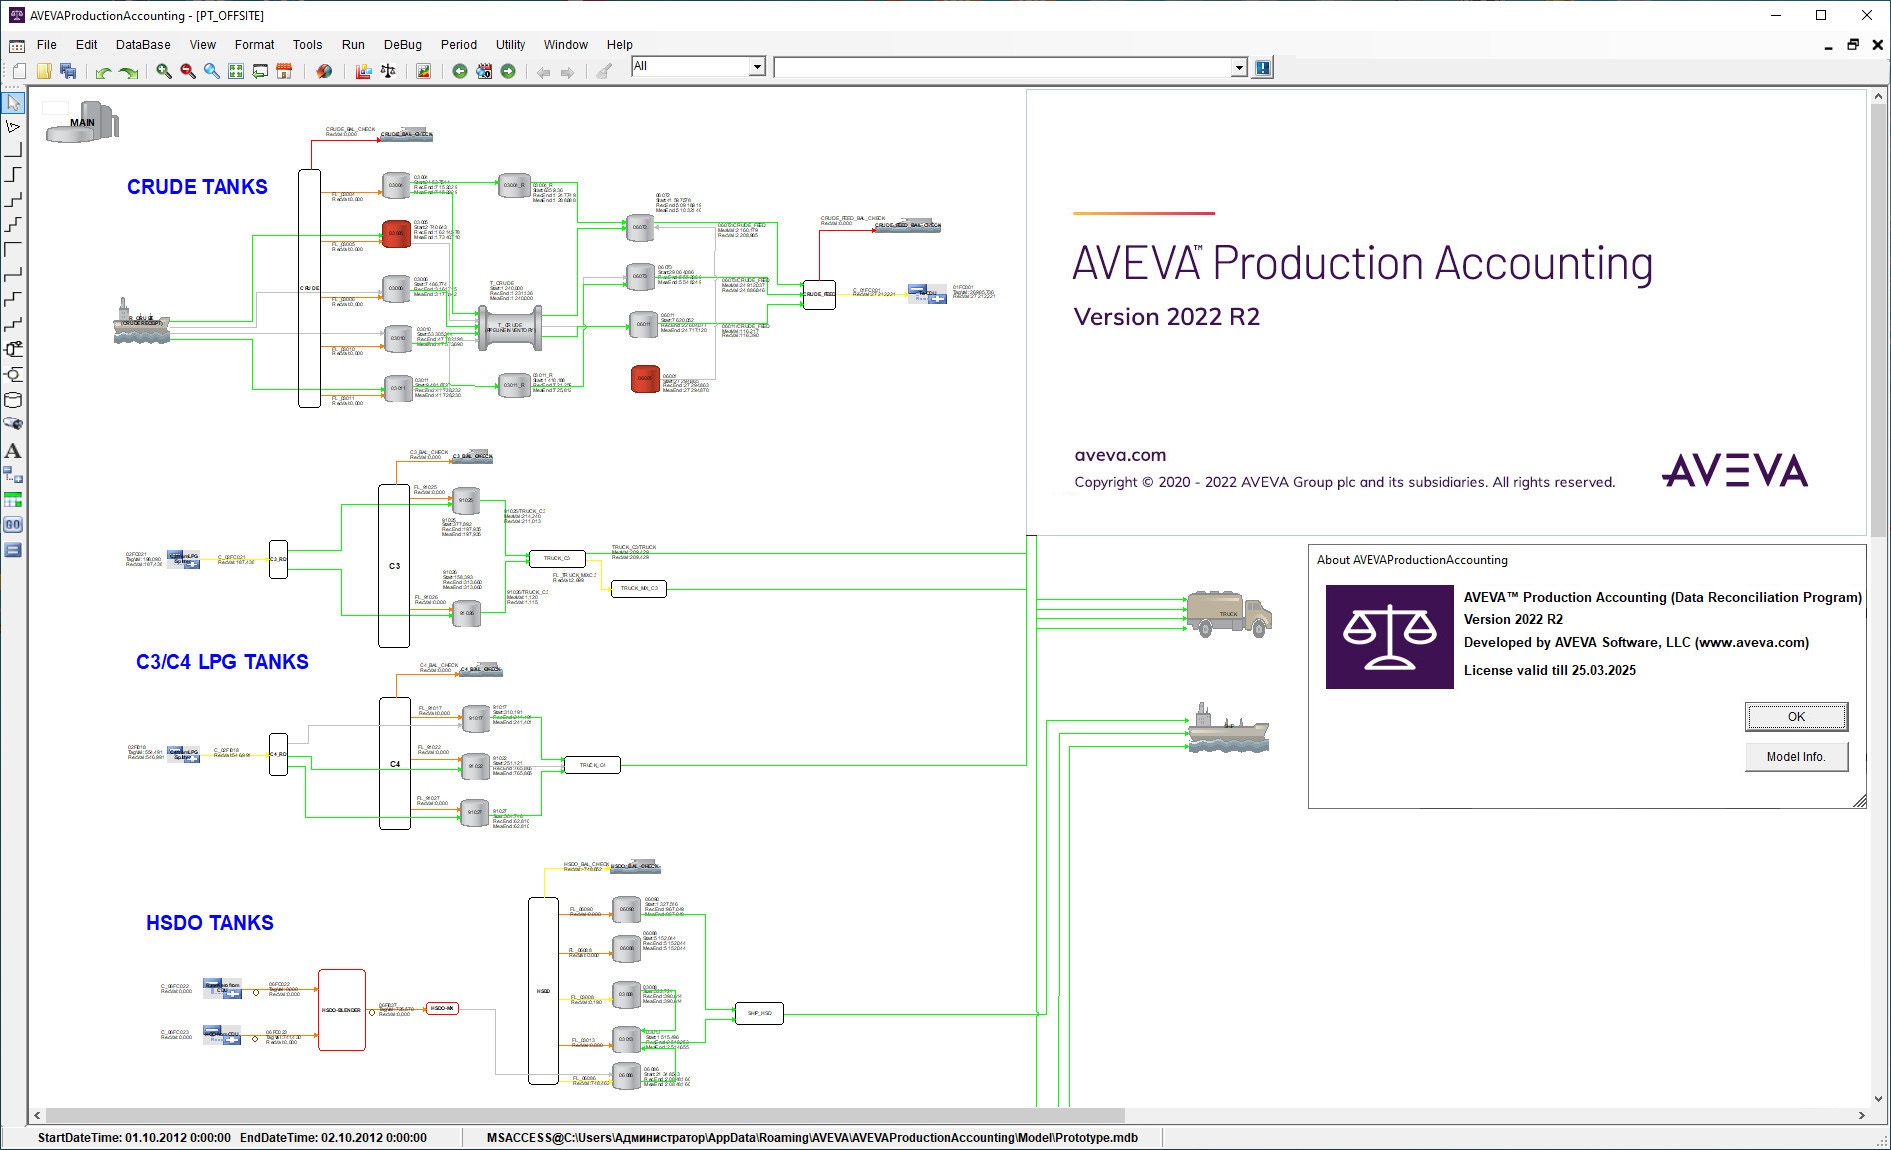 Working with AVEVA Production Accounting 2022 R2 full